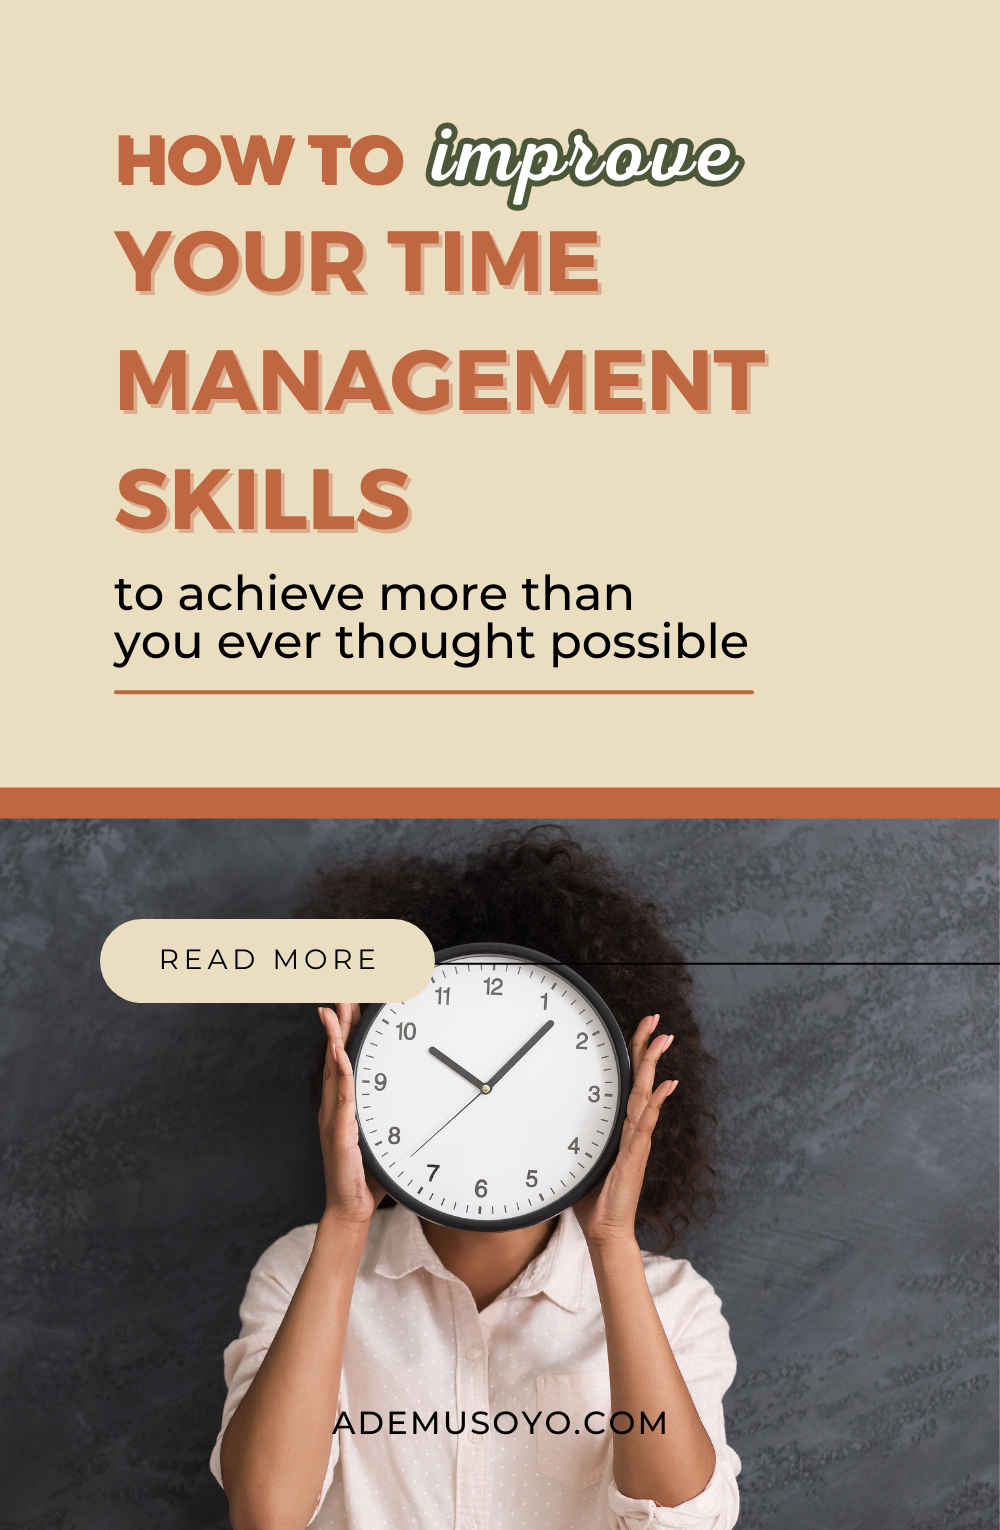 Discover effective time management strategies to enhance your productivity and achieve your goals. From goal setting to time blocking, learn simple techniques to excel in your professional and business life. Learn how to improve your efficiency and make the most of your time at work with these practical tips.